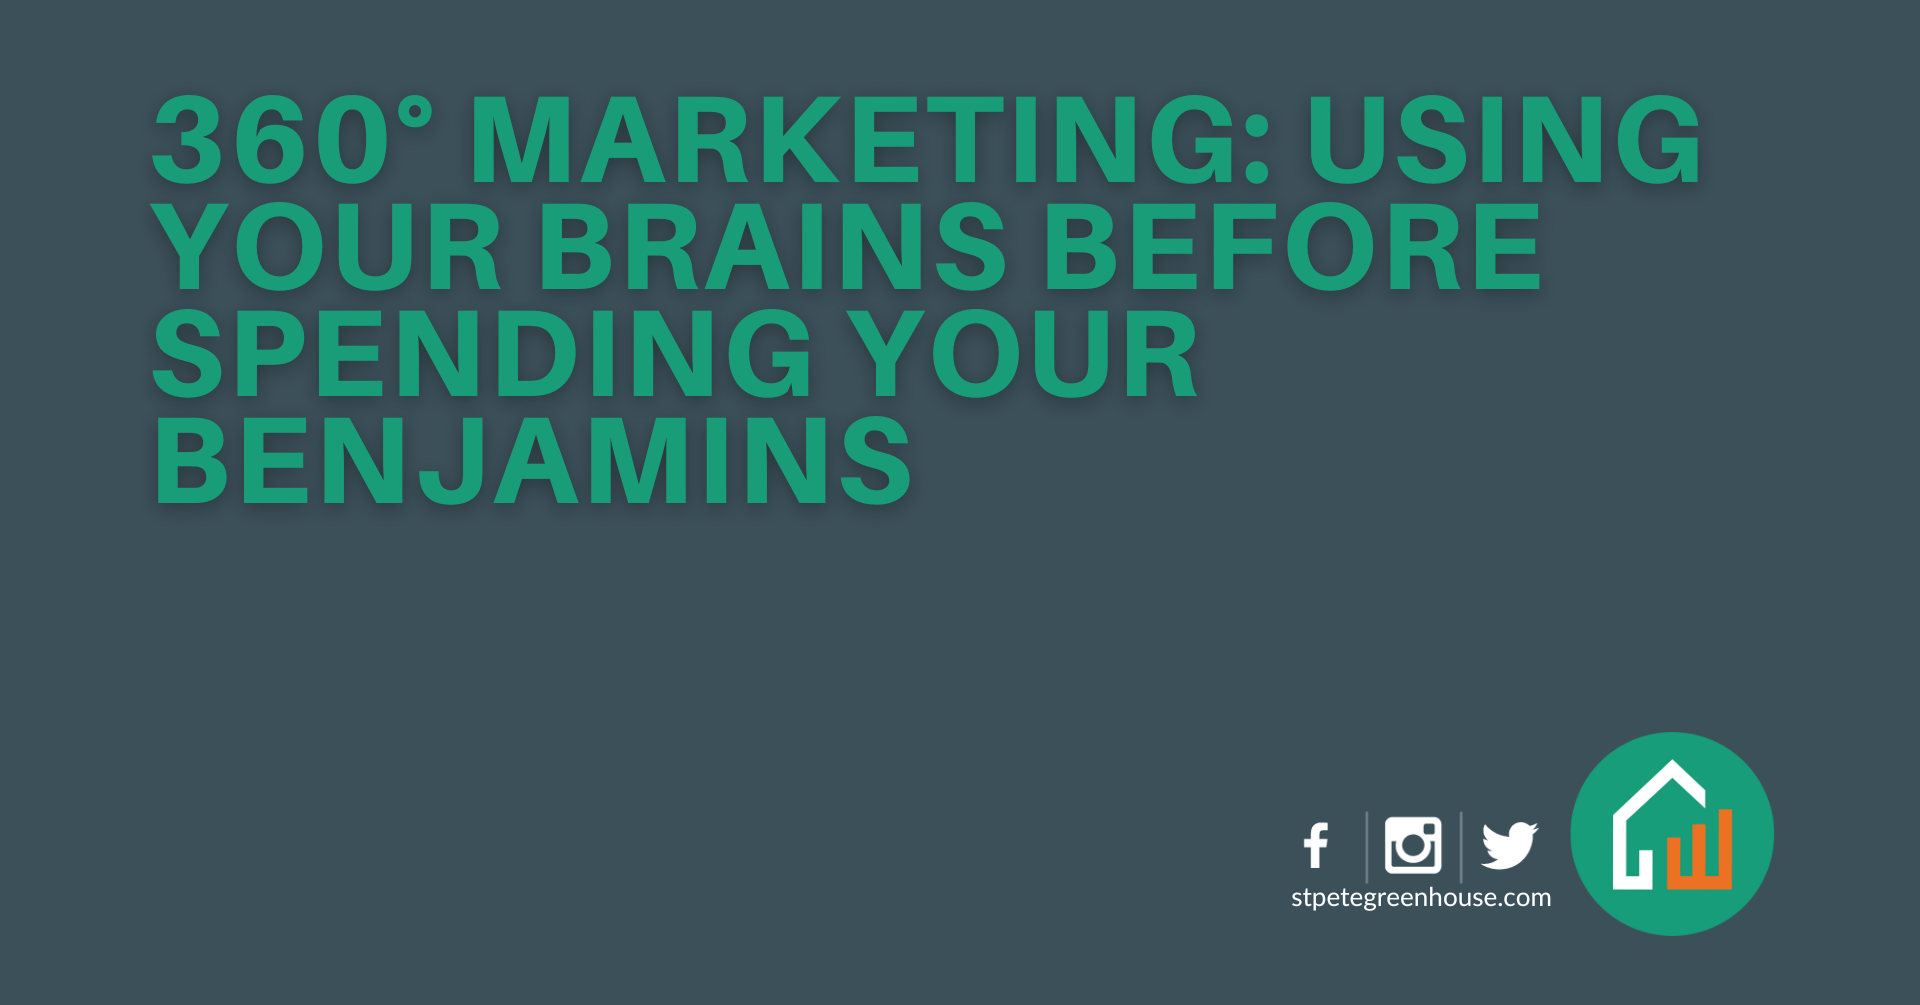 360° Marketing: Using Your Brains Before Spending Your Benjamins main image